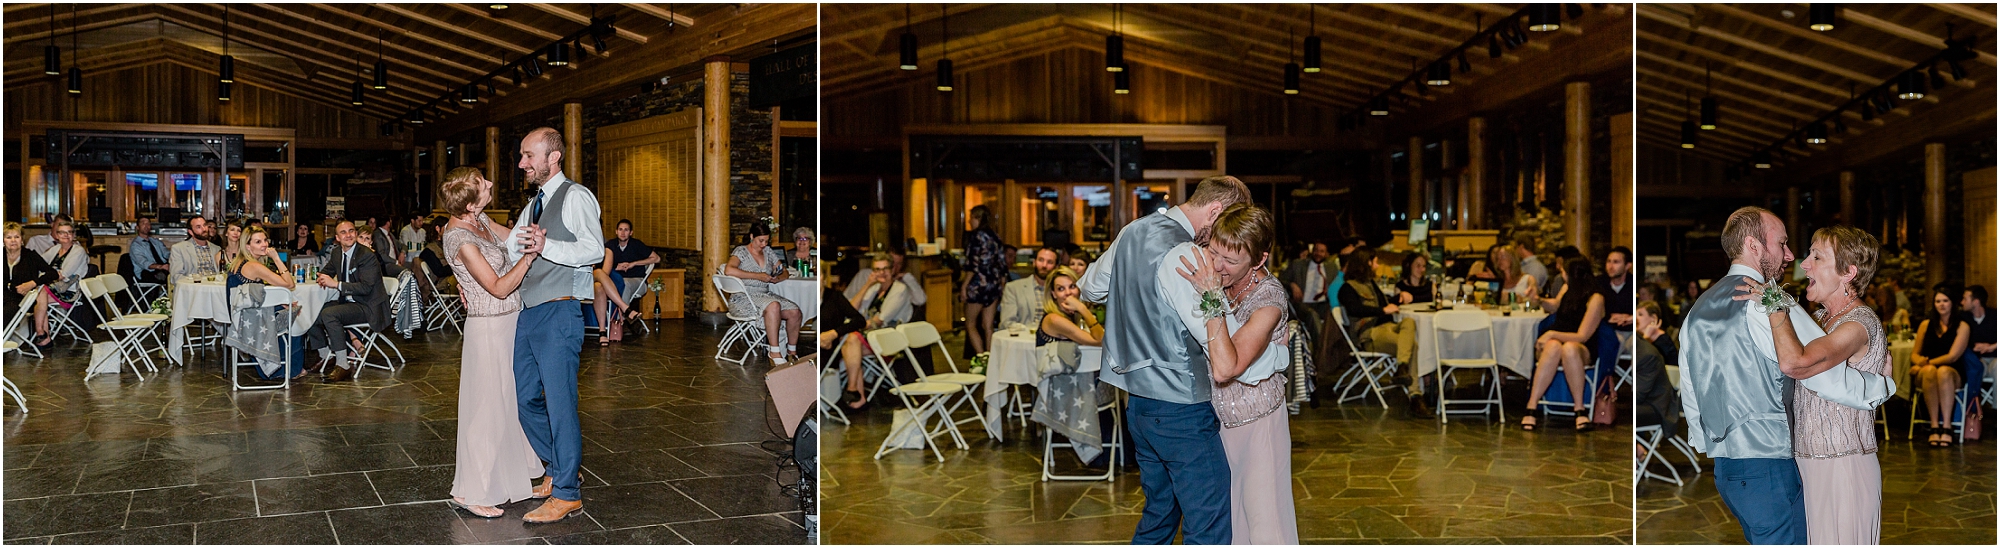 A mother son dance at this High Desert Museum homestead wedding in Bend, OR. | Erica Swantek Photography